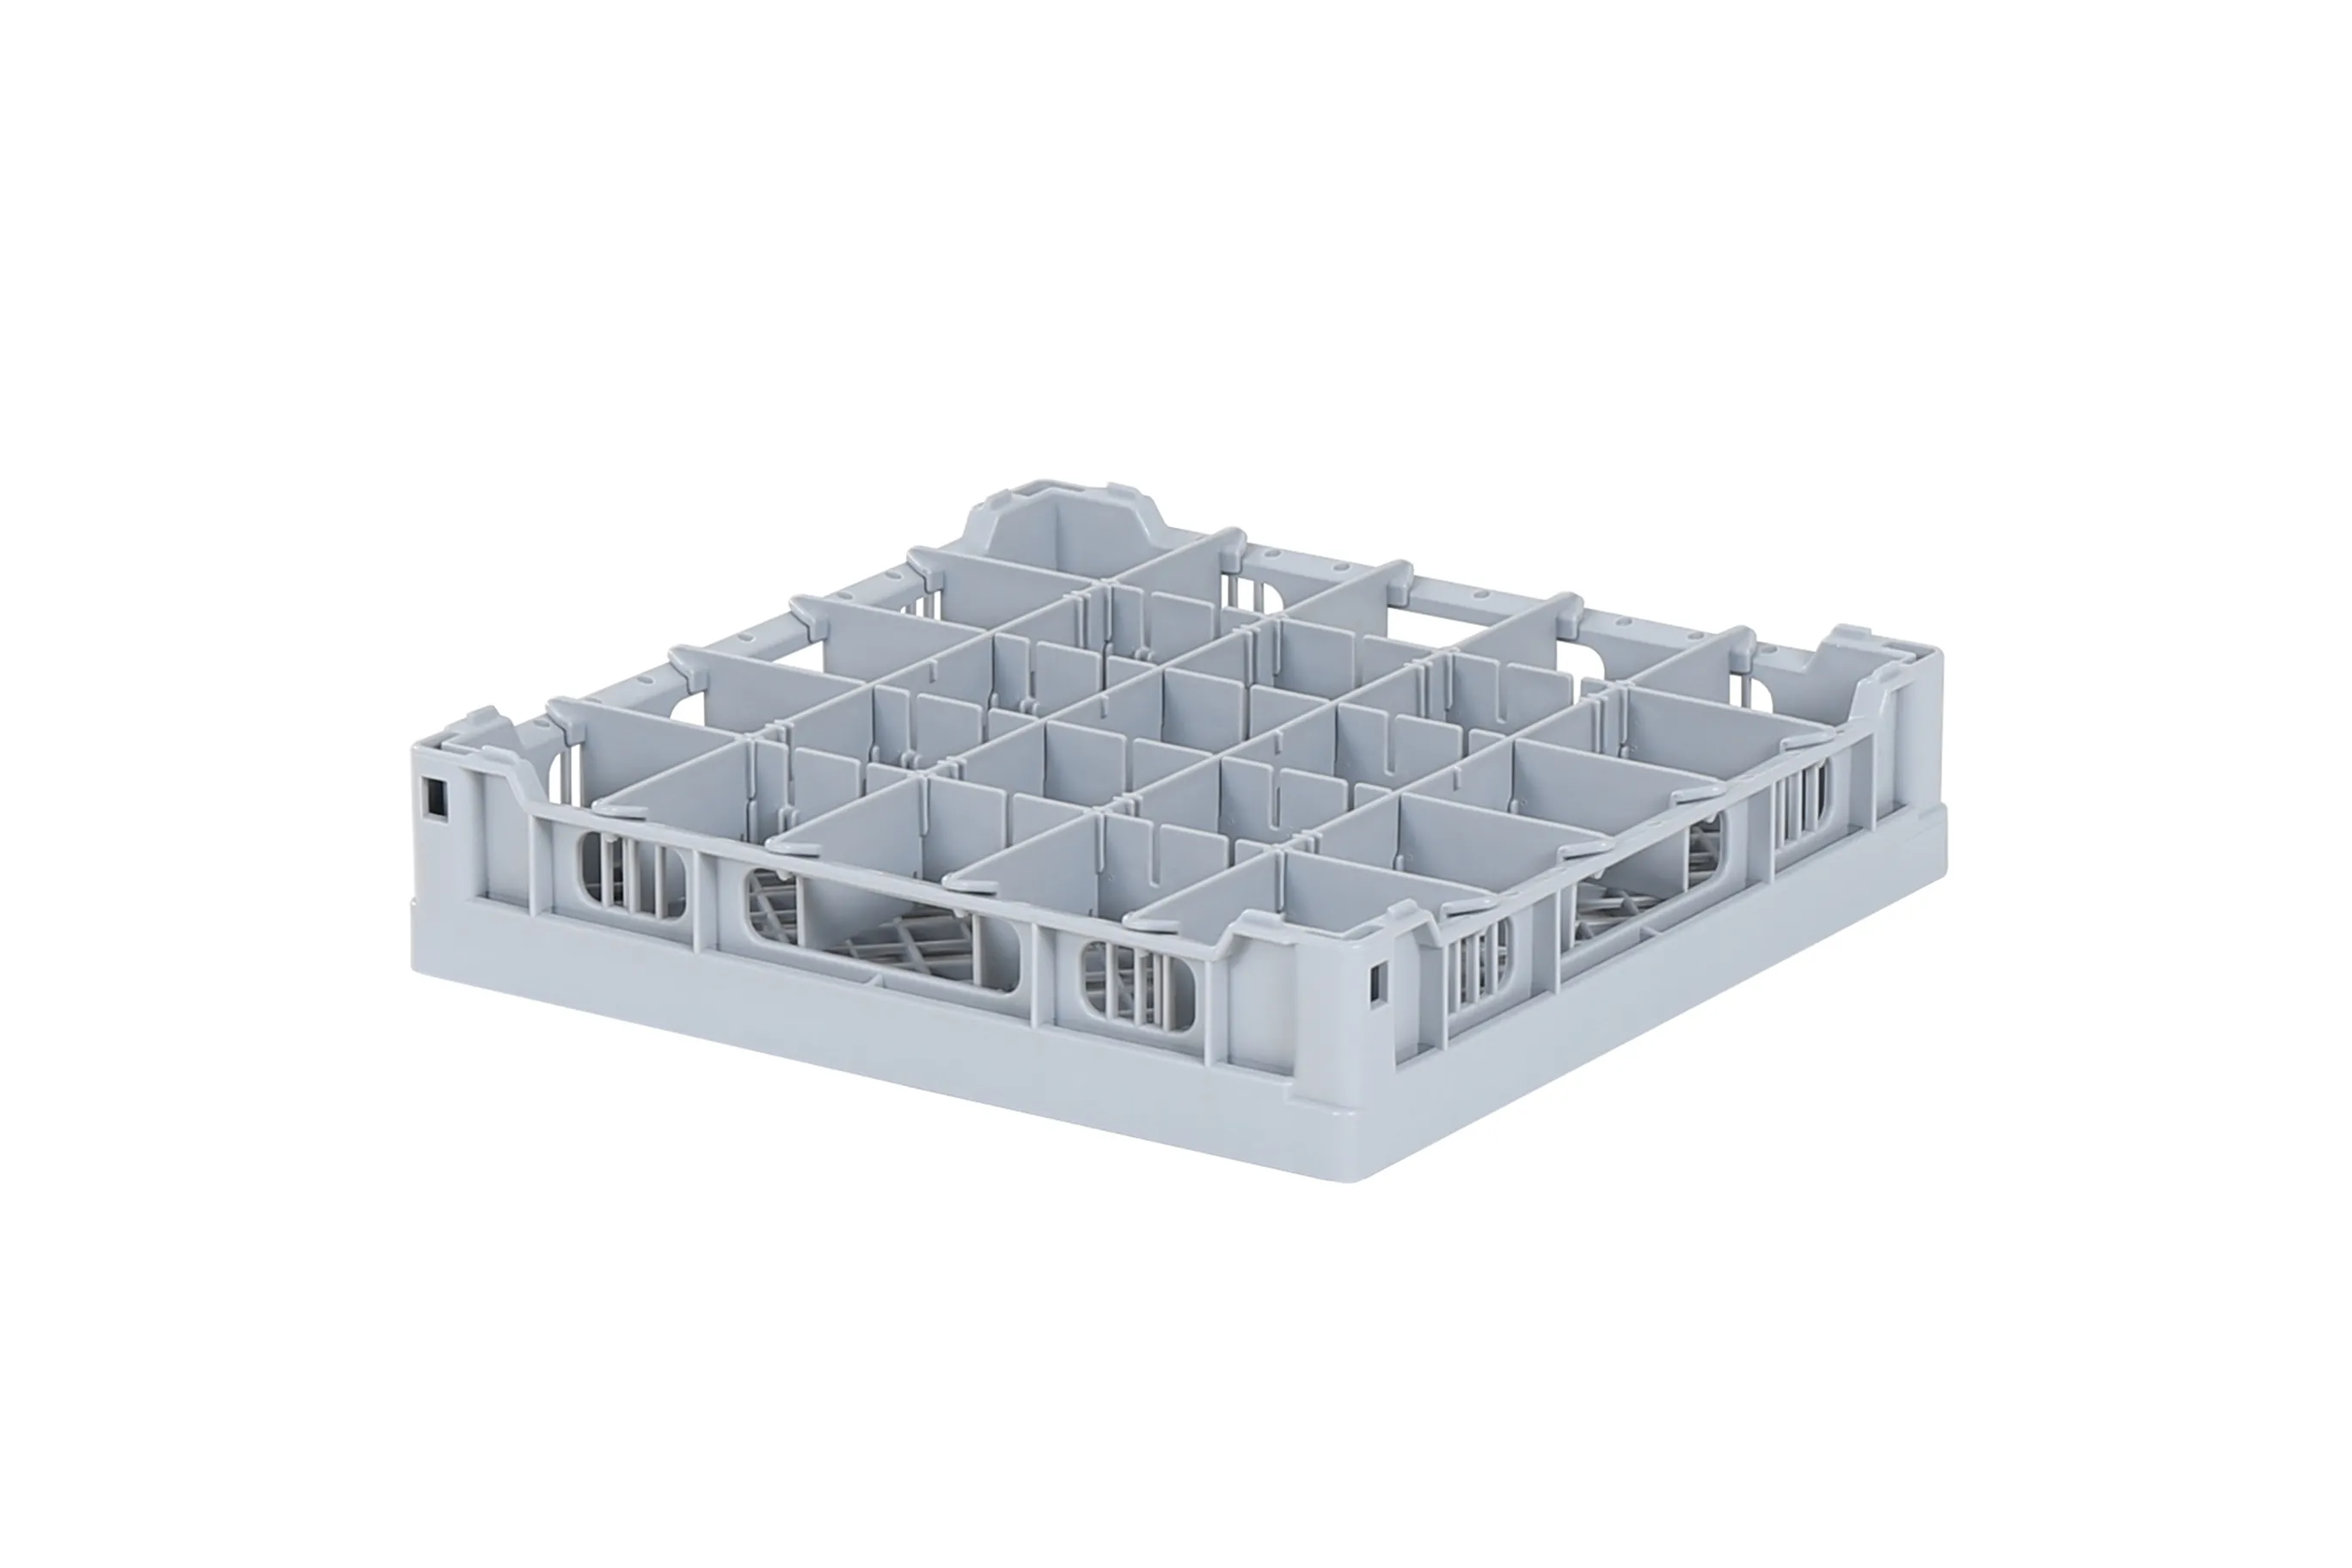 Dishwasher basket 400 x 400 mm - maximum glass height 65 mm - with 5 x 5 compartment division - maximum Ø of glass 68mm